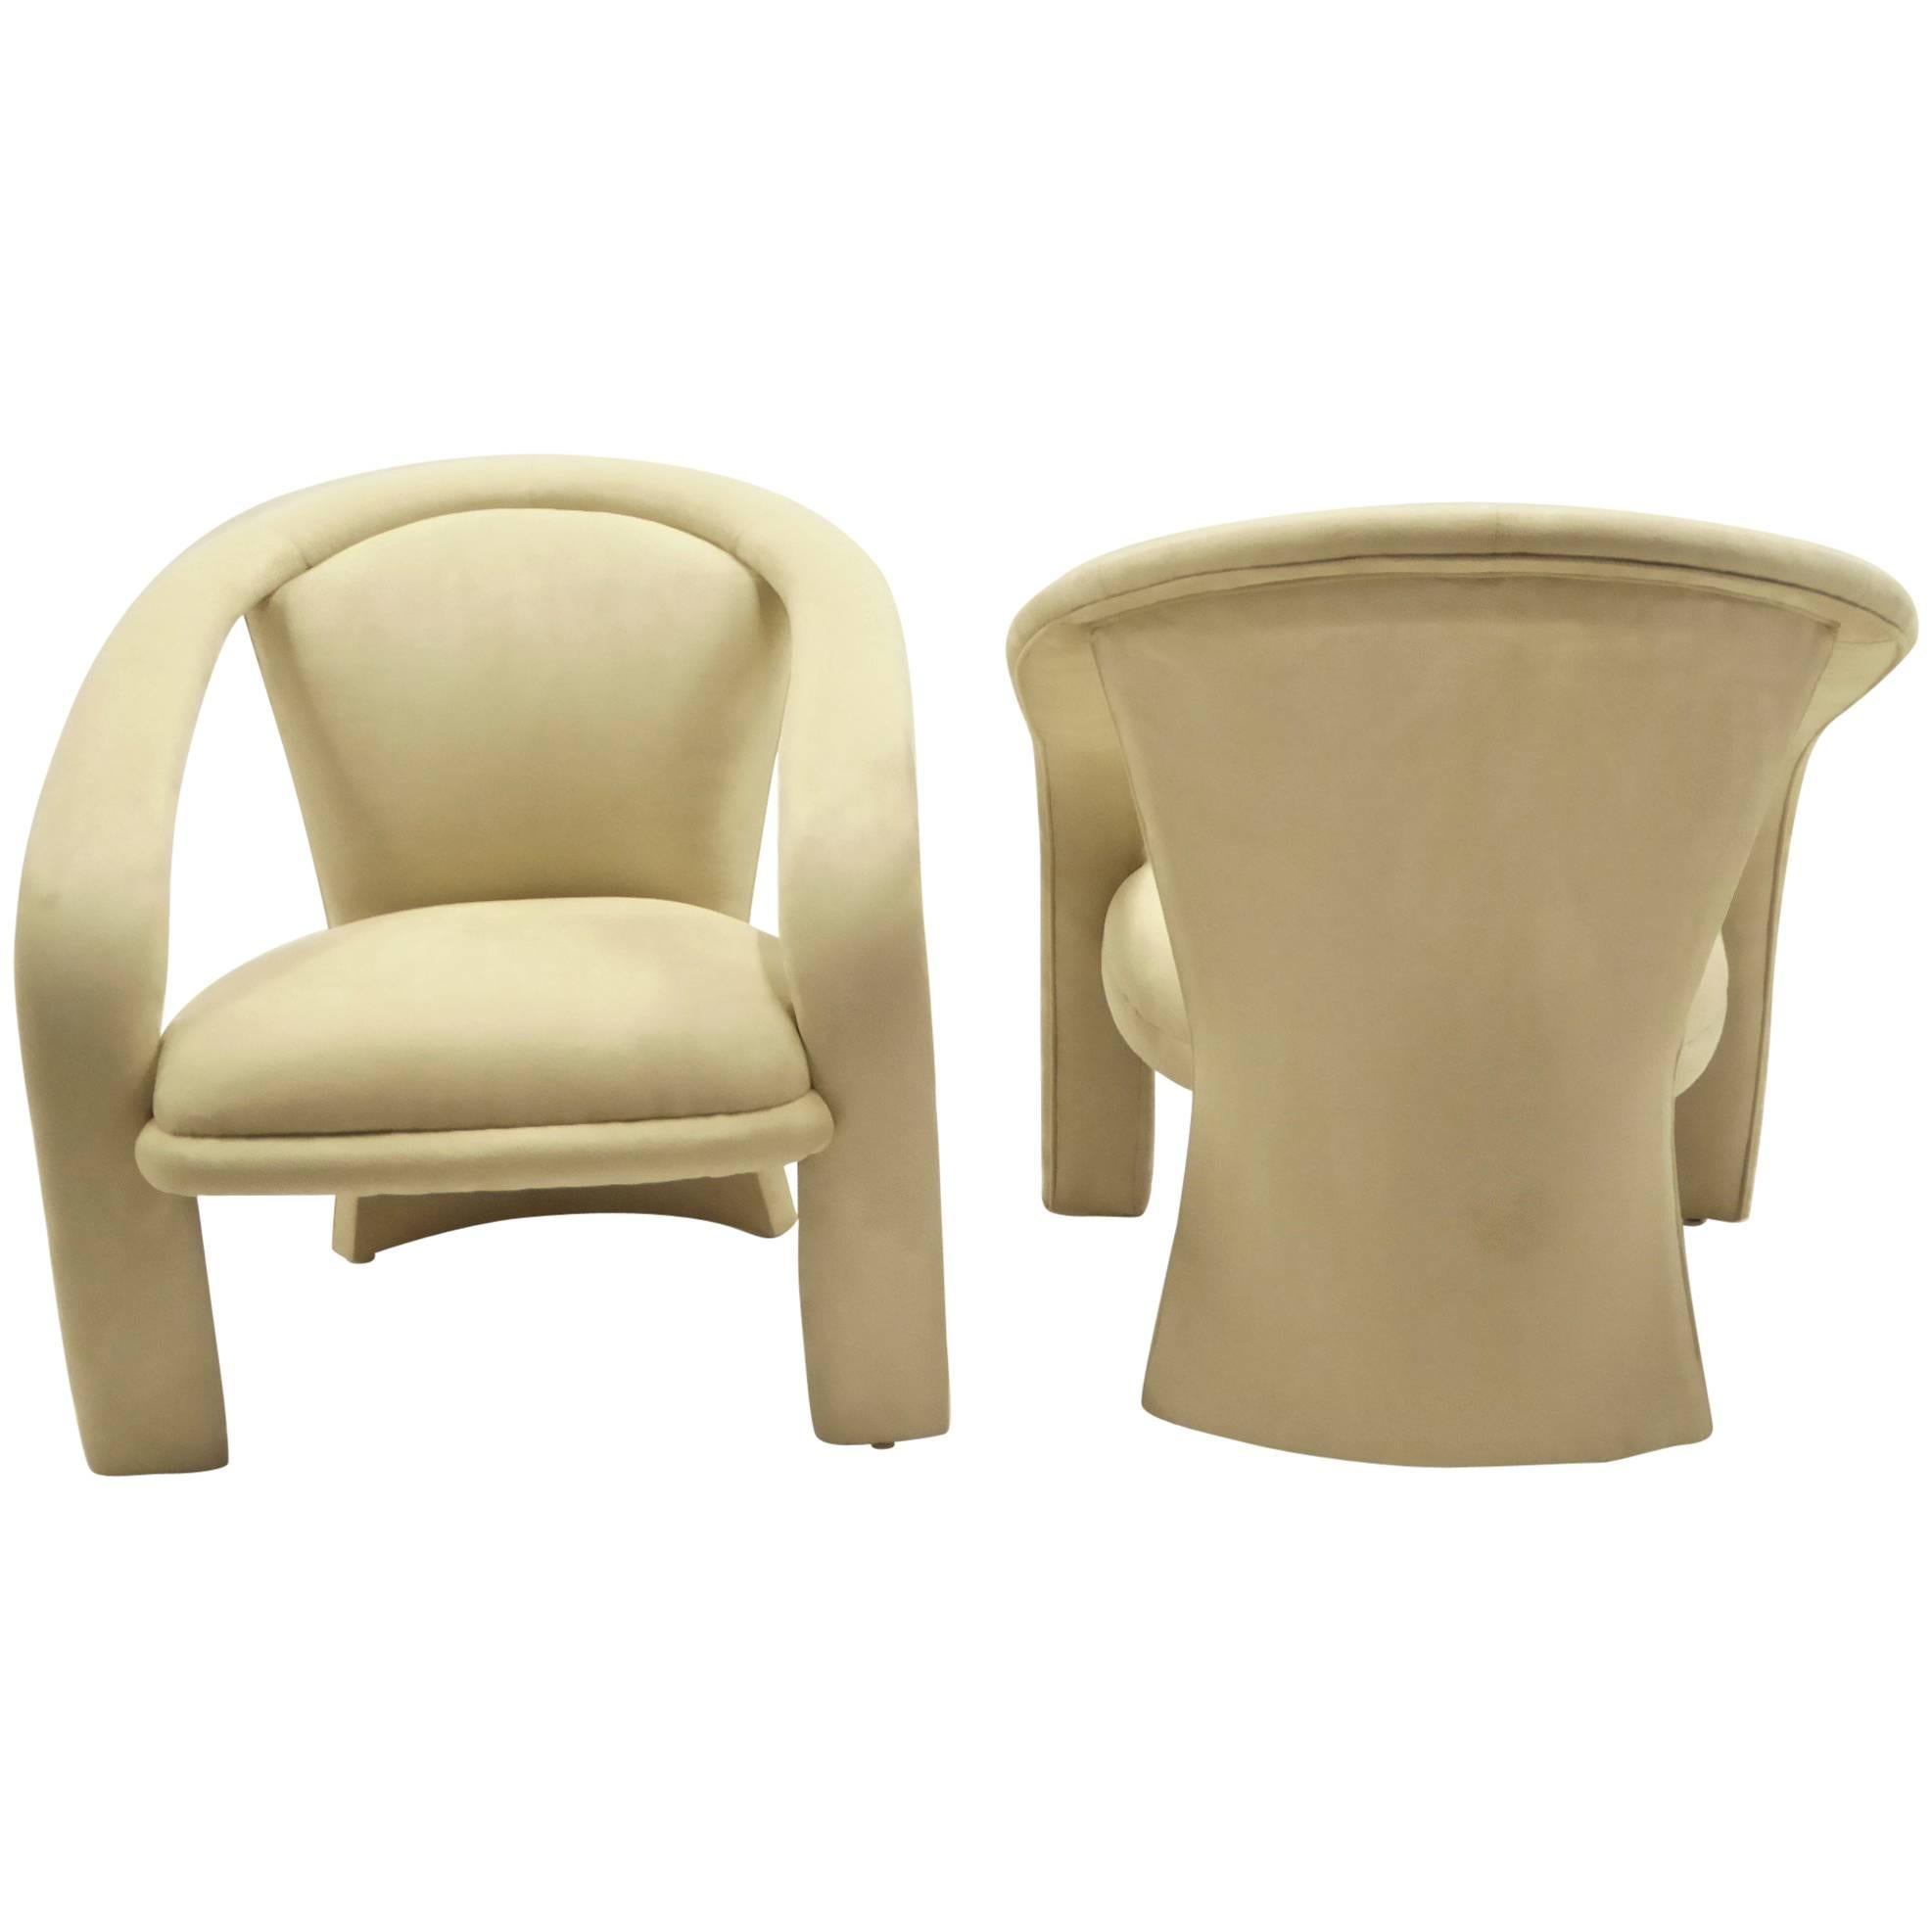 Modern Pop Lounge Chairs by Carsons in Ultrasuede